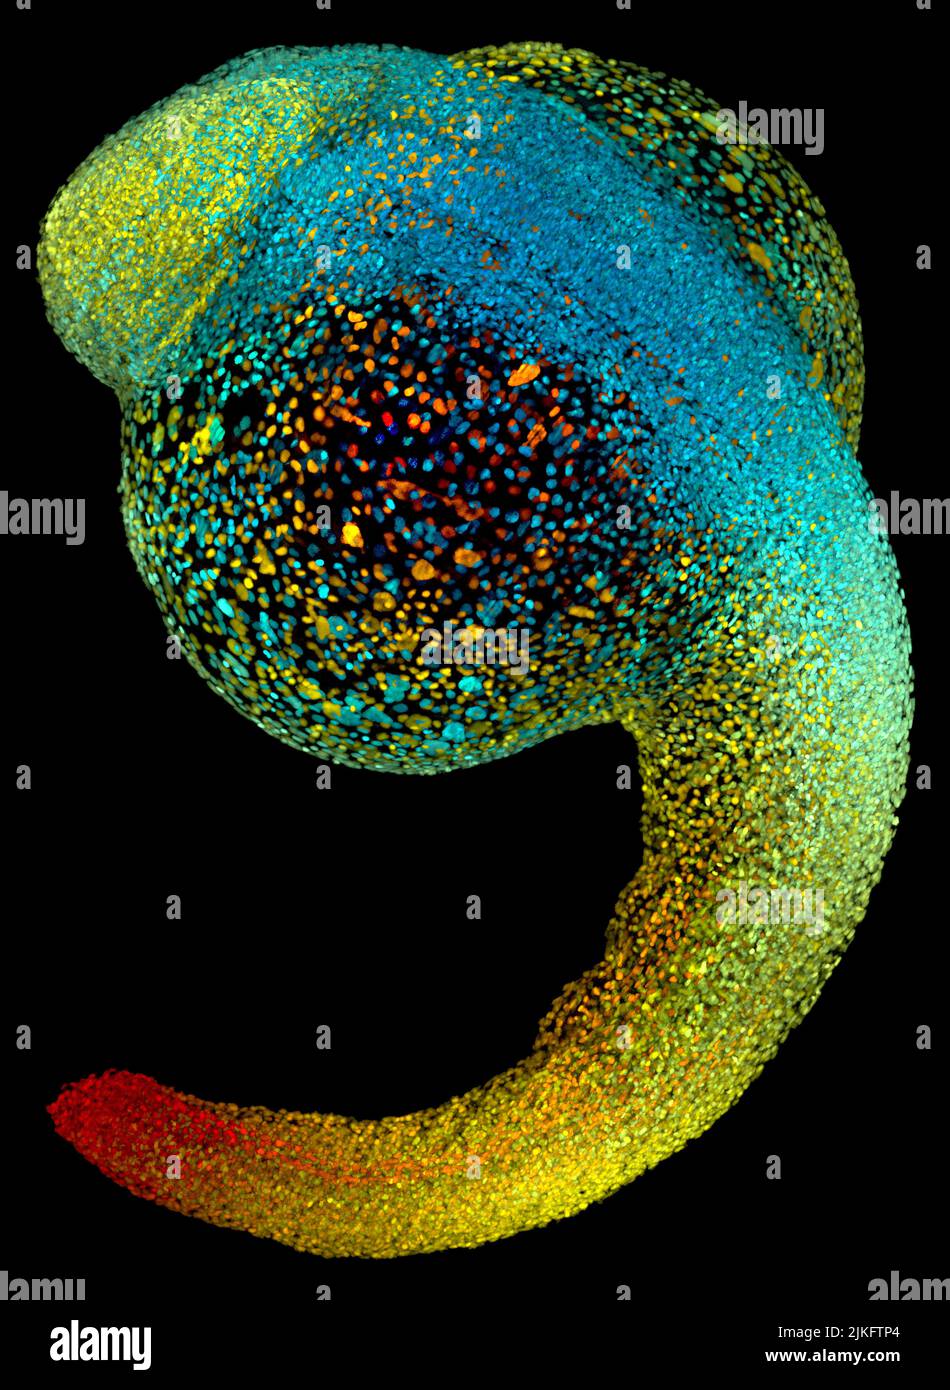 Just 22 hours after fertilization, this zebrafish embryo is already taking shape. By 36 hours, all major organs will have started to form. The rapid growth of zebrafish and Stock Photo